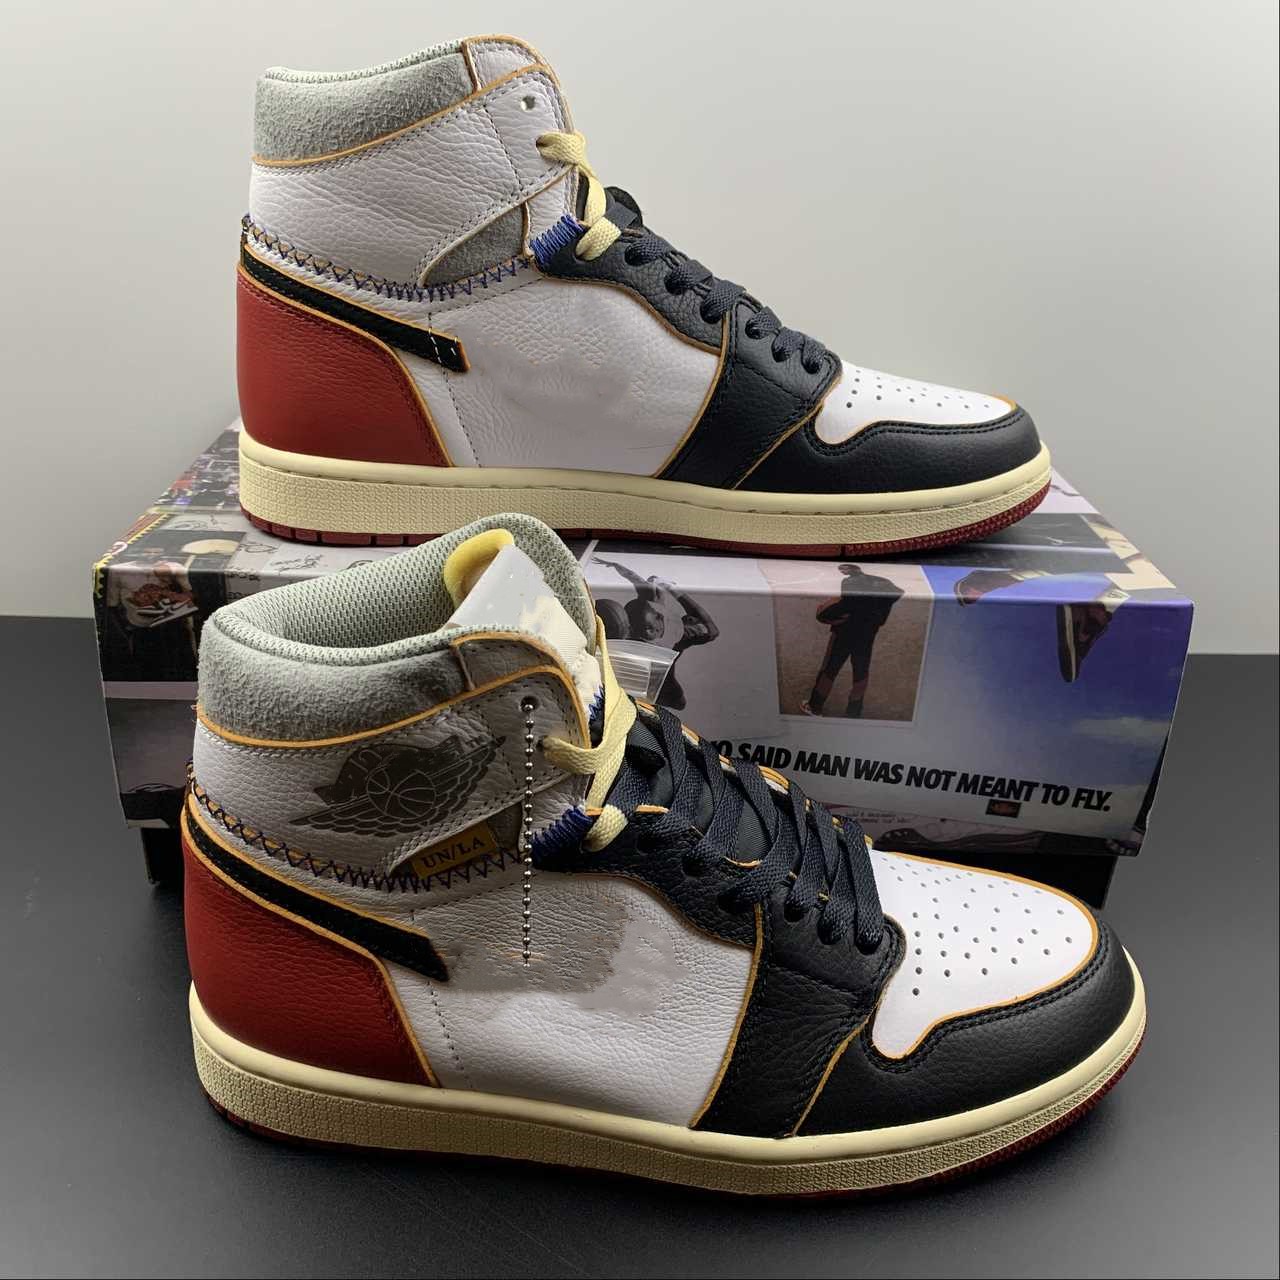 

Basketball Designer Shoes Varsity Red Jumpman 1 Retro High Union Los Angeles Black Toe OG Quality Sports Sneakers With Original Box